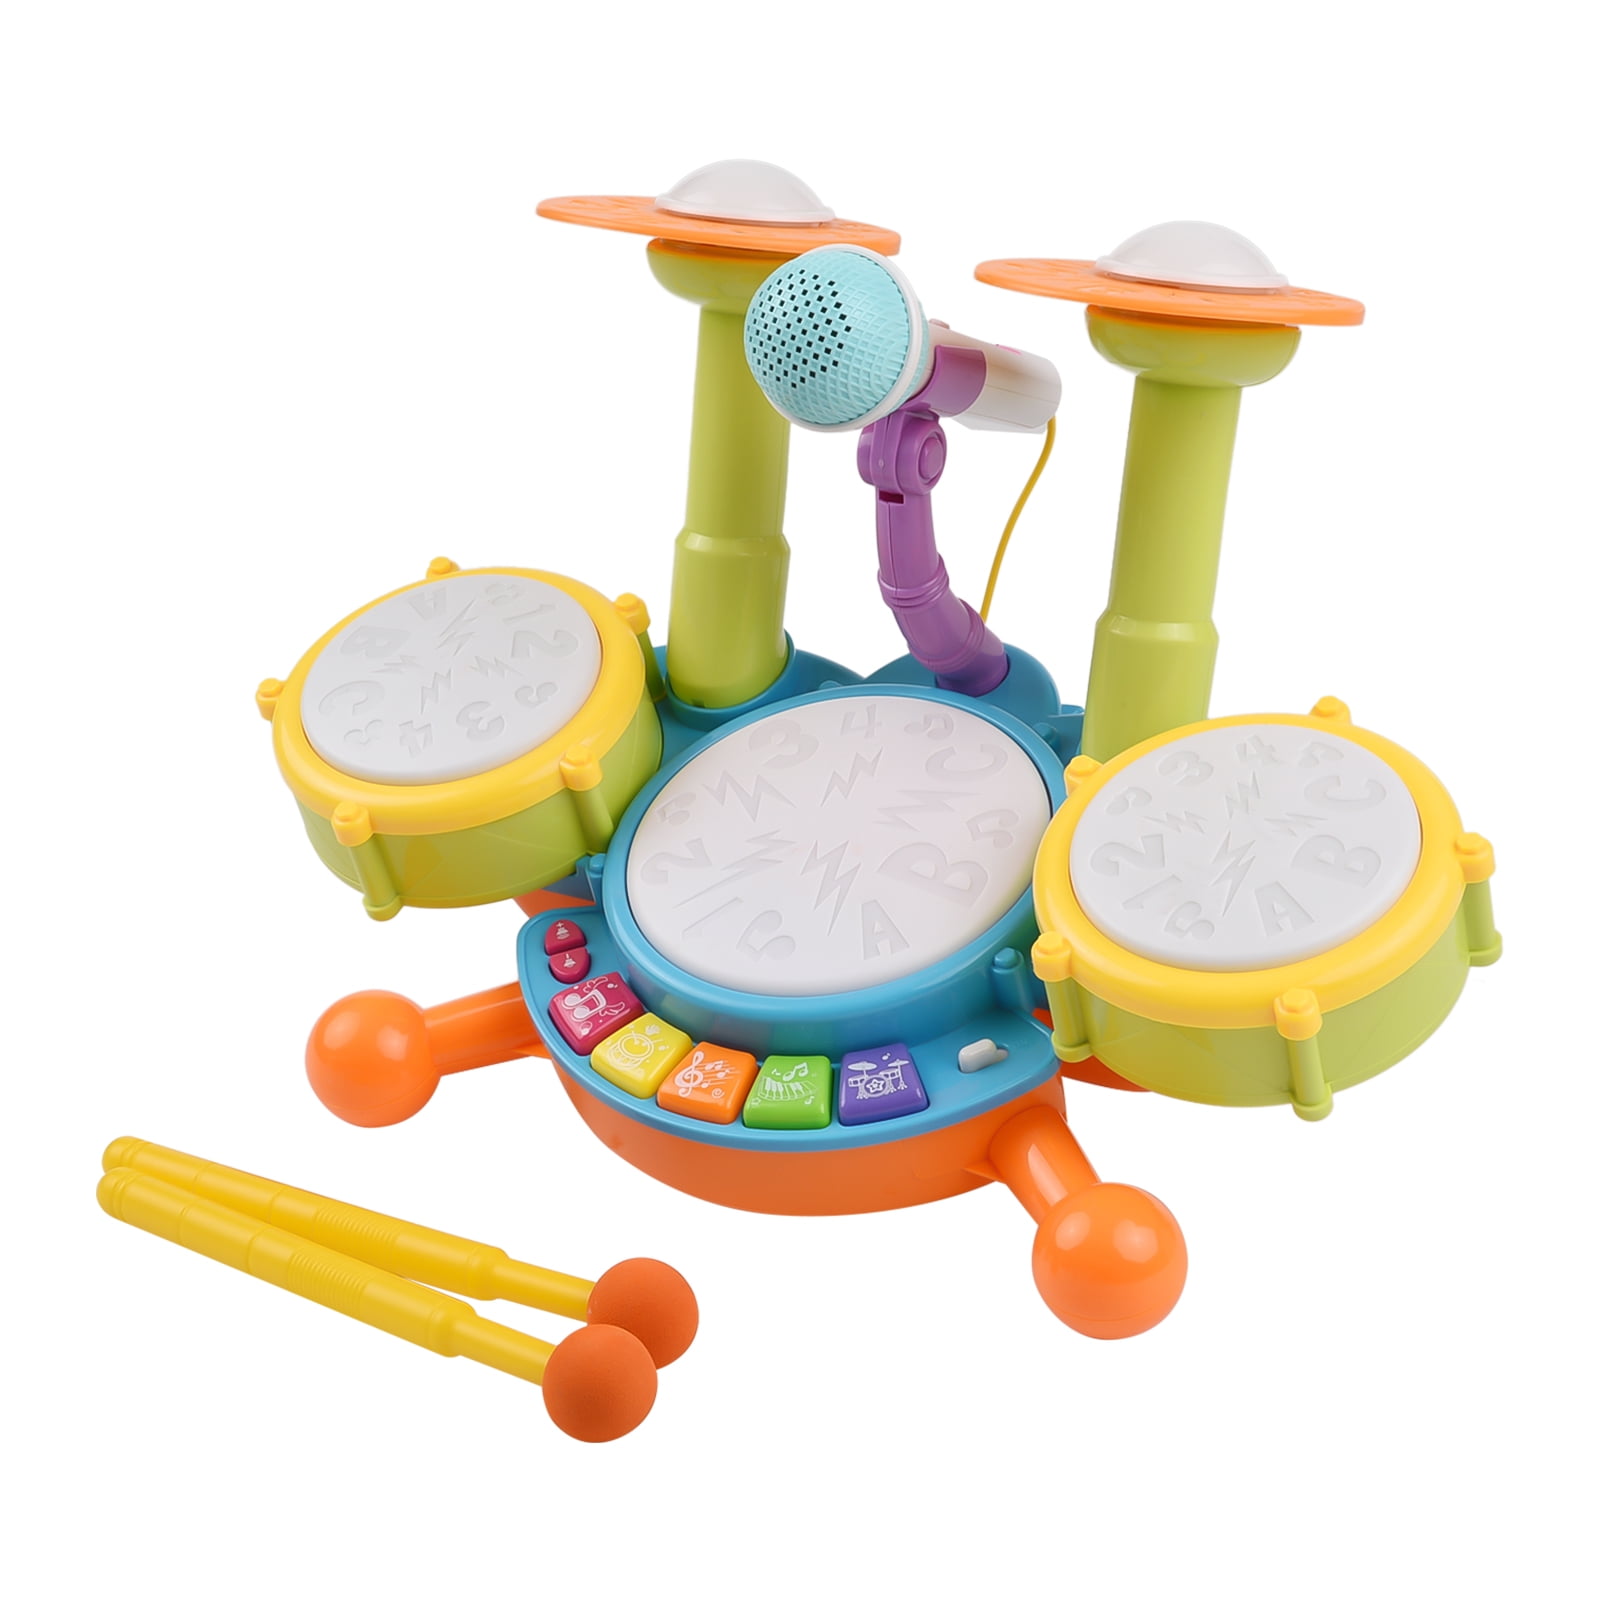 Wooden Toy Collection Tunable Drum Kids Pretended Play Musical Gift P3 